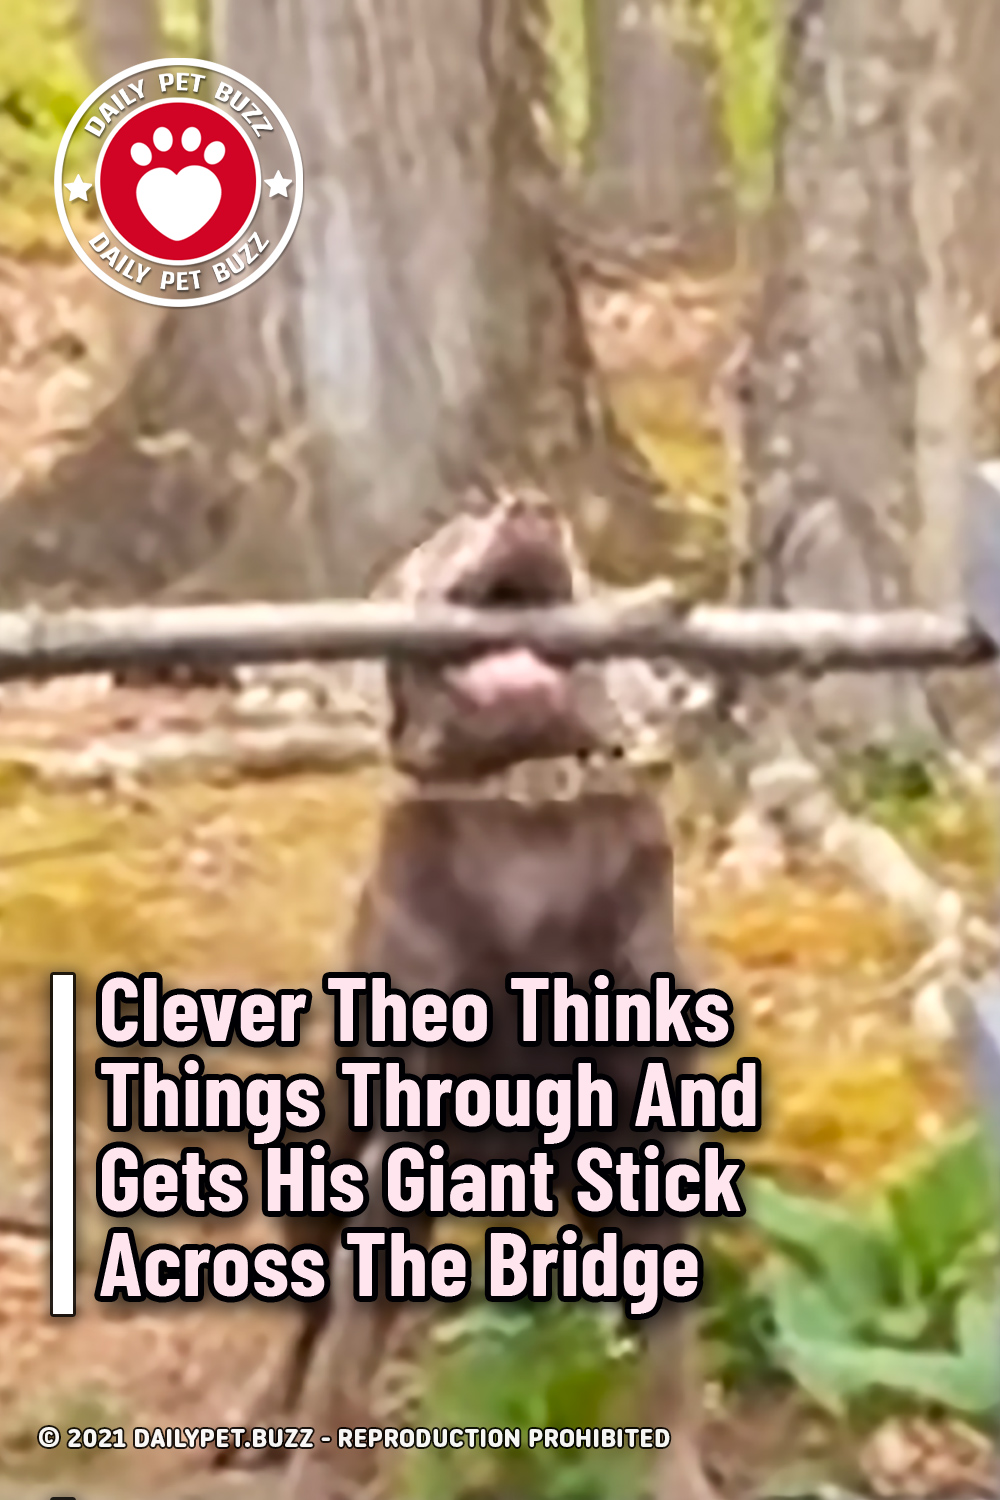 Clever Theo Thinks Things Through And Gets His Giant Stick Across The Bridge